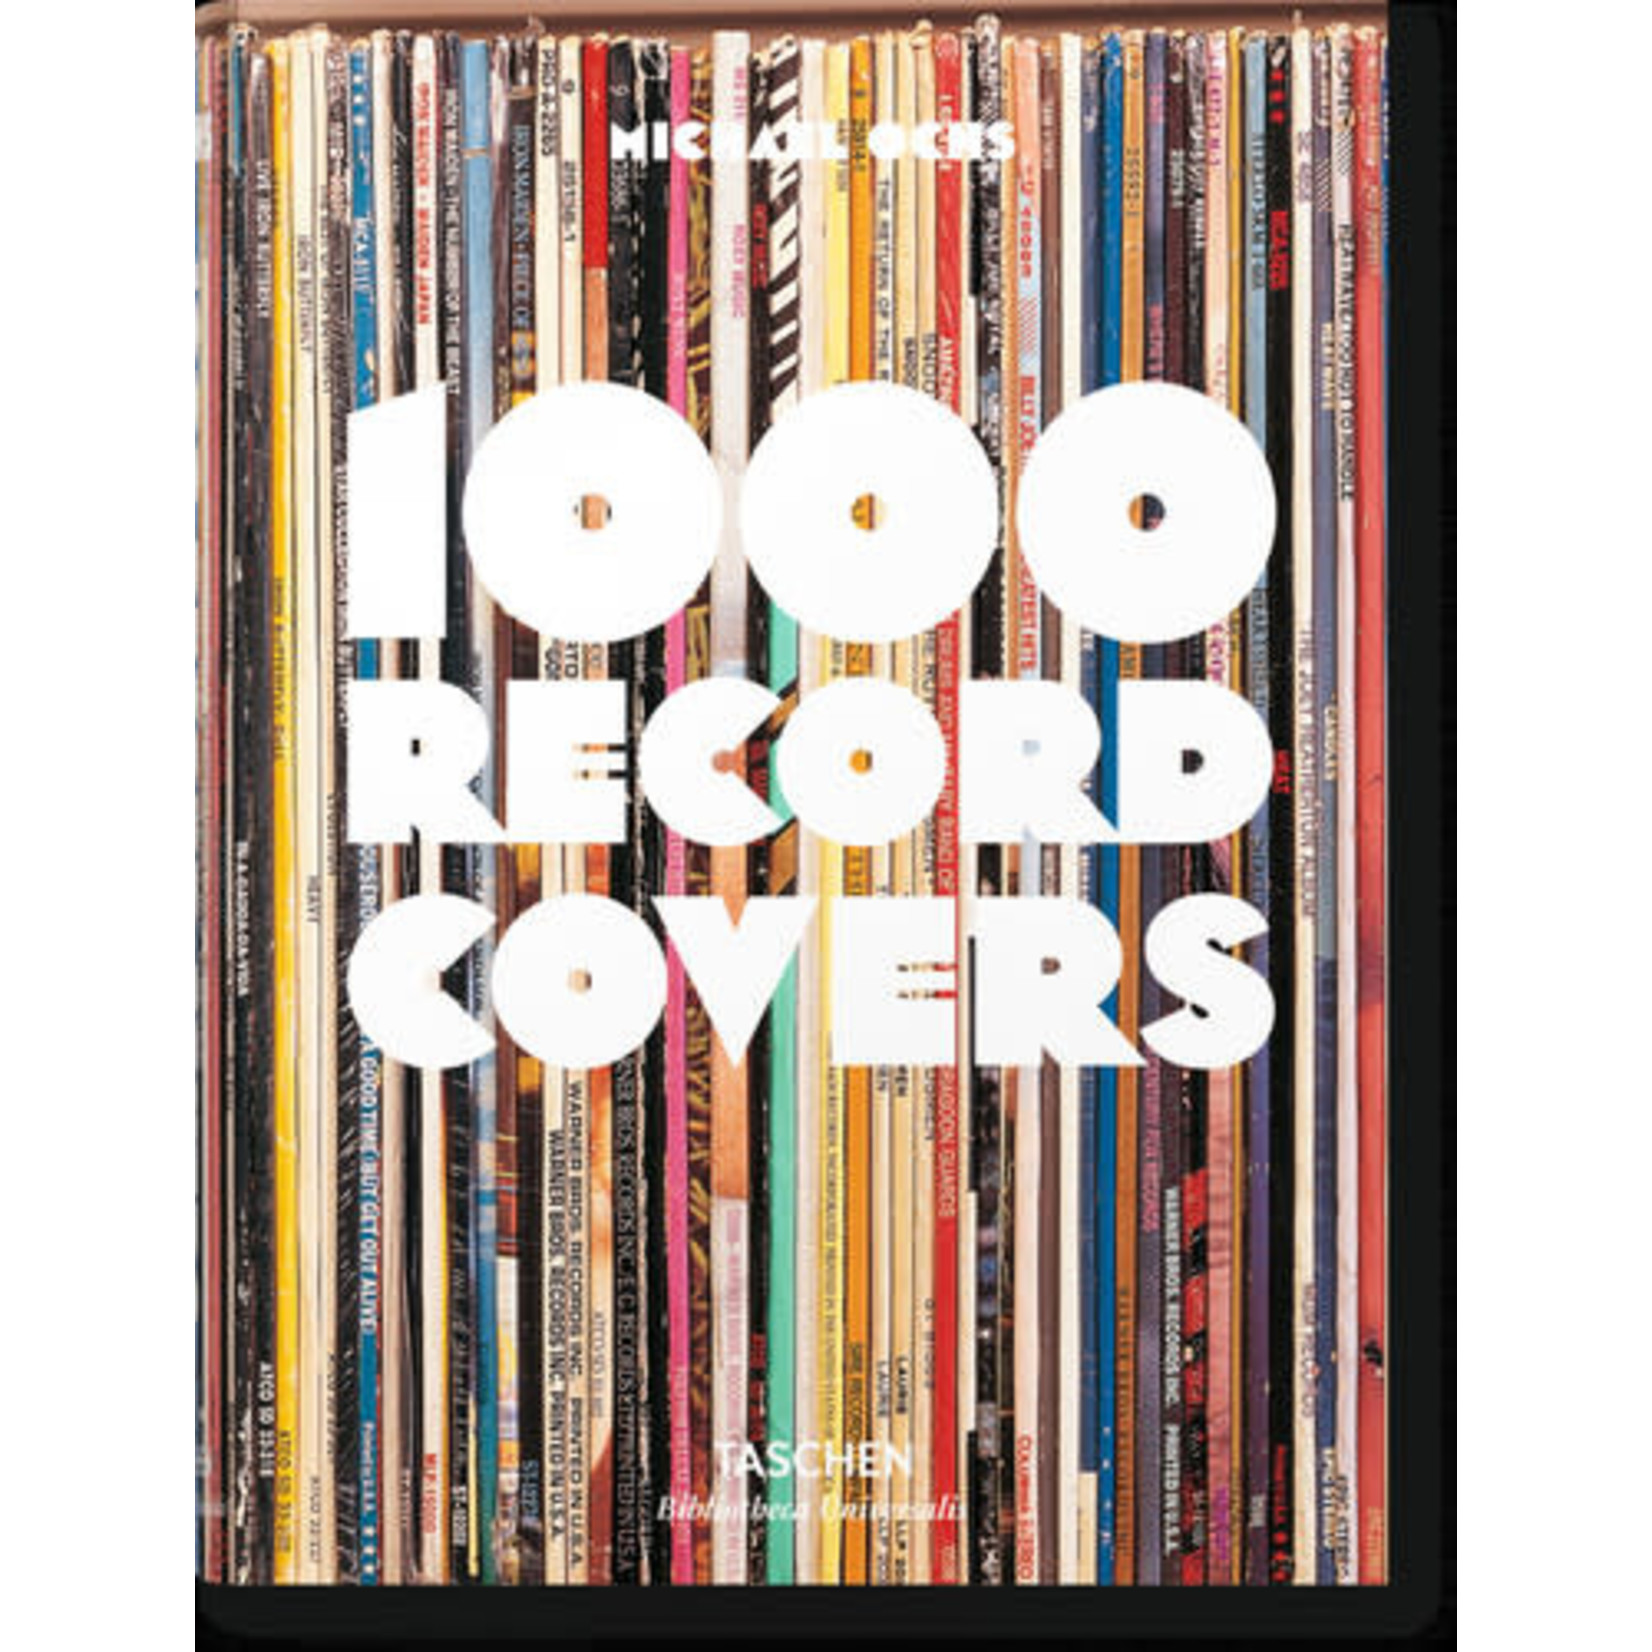 1000 Record Covers (Book)